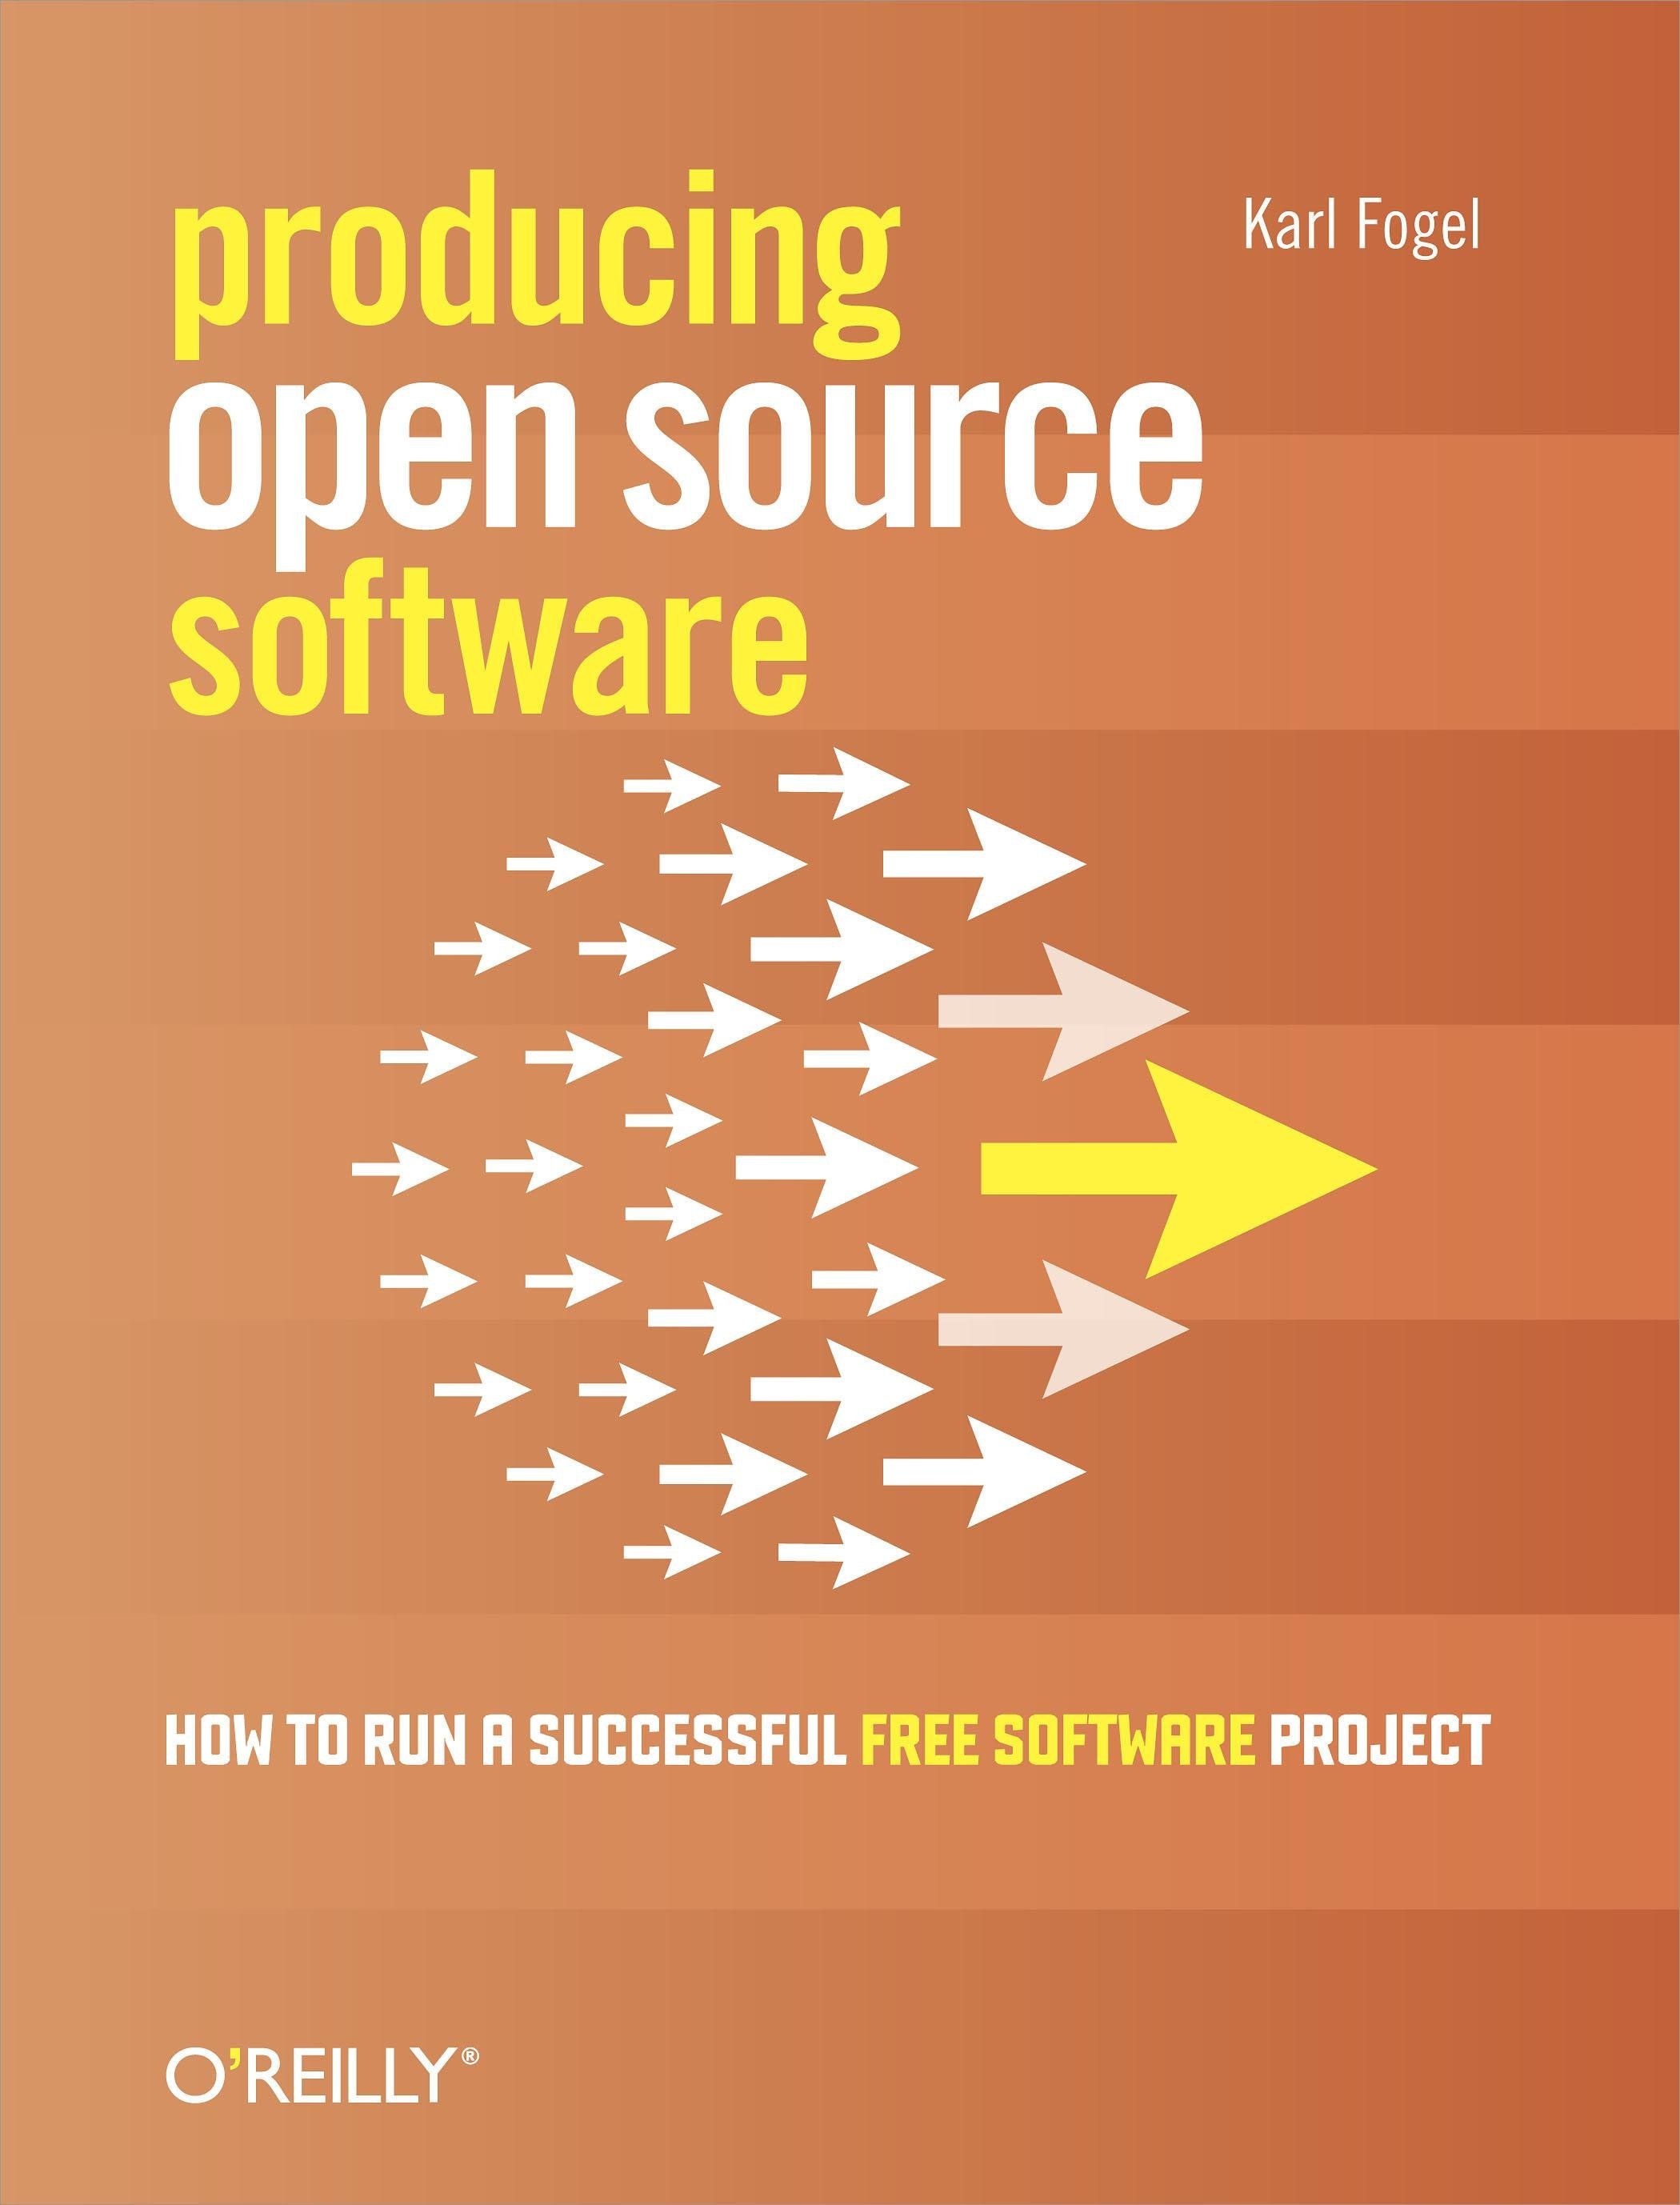 free open source software to open .fdx final draft files